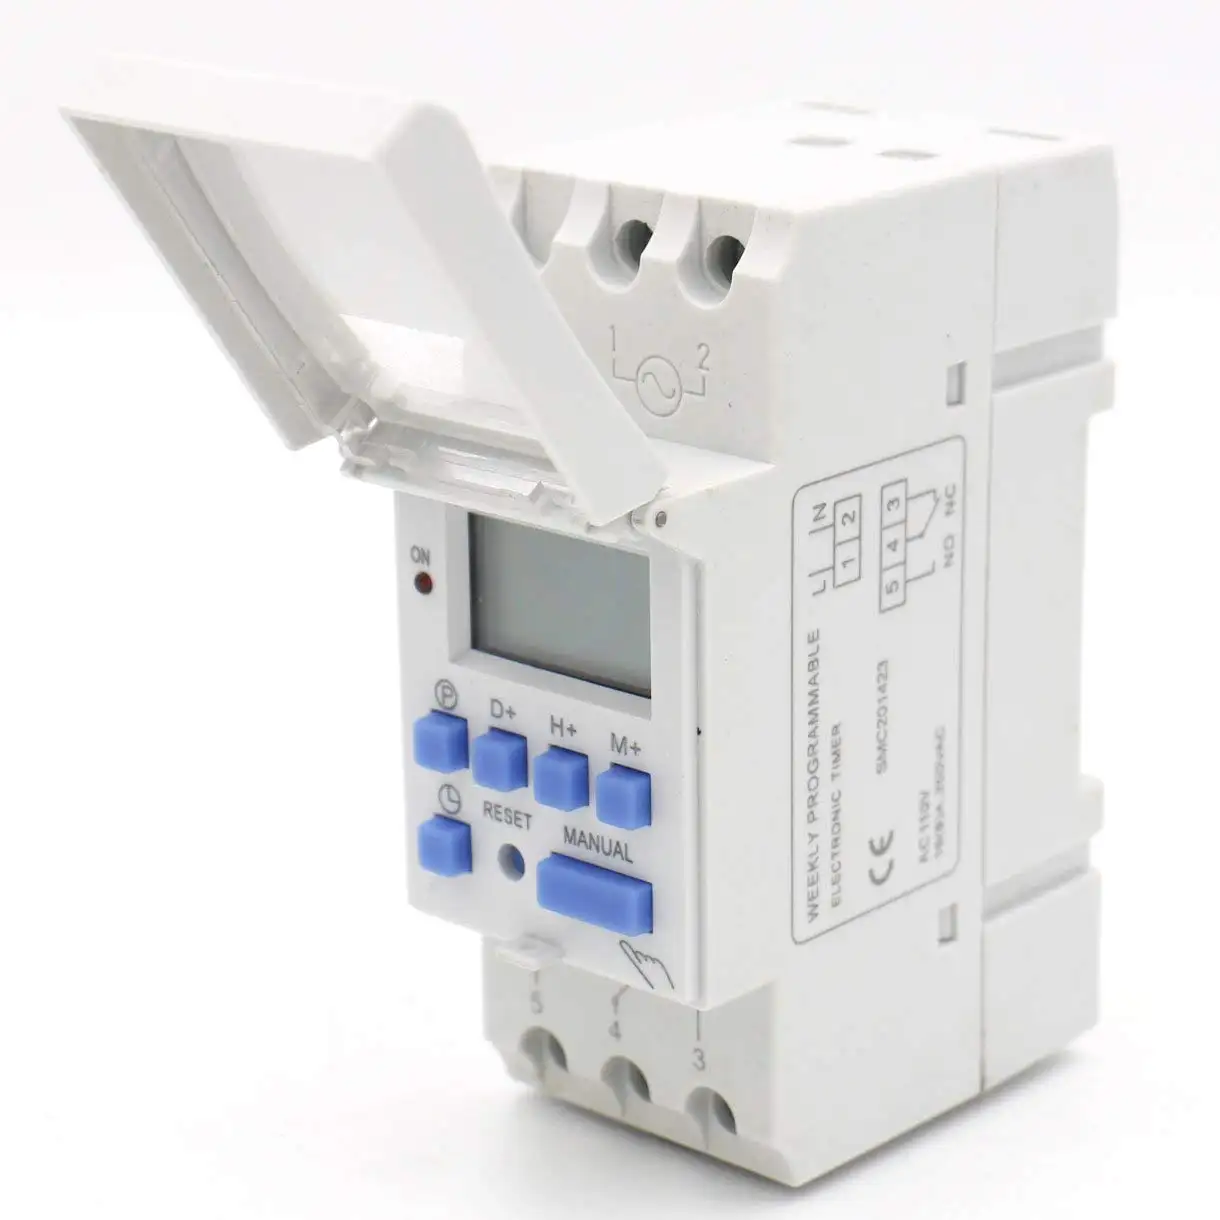 DAQCN In Stock TB388 AC 220V 16A Electric Controller 24 Hour Time Switch Timer